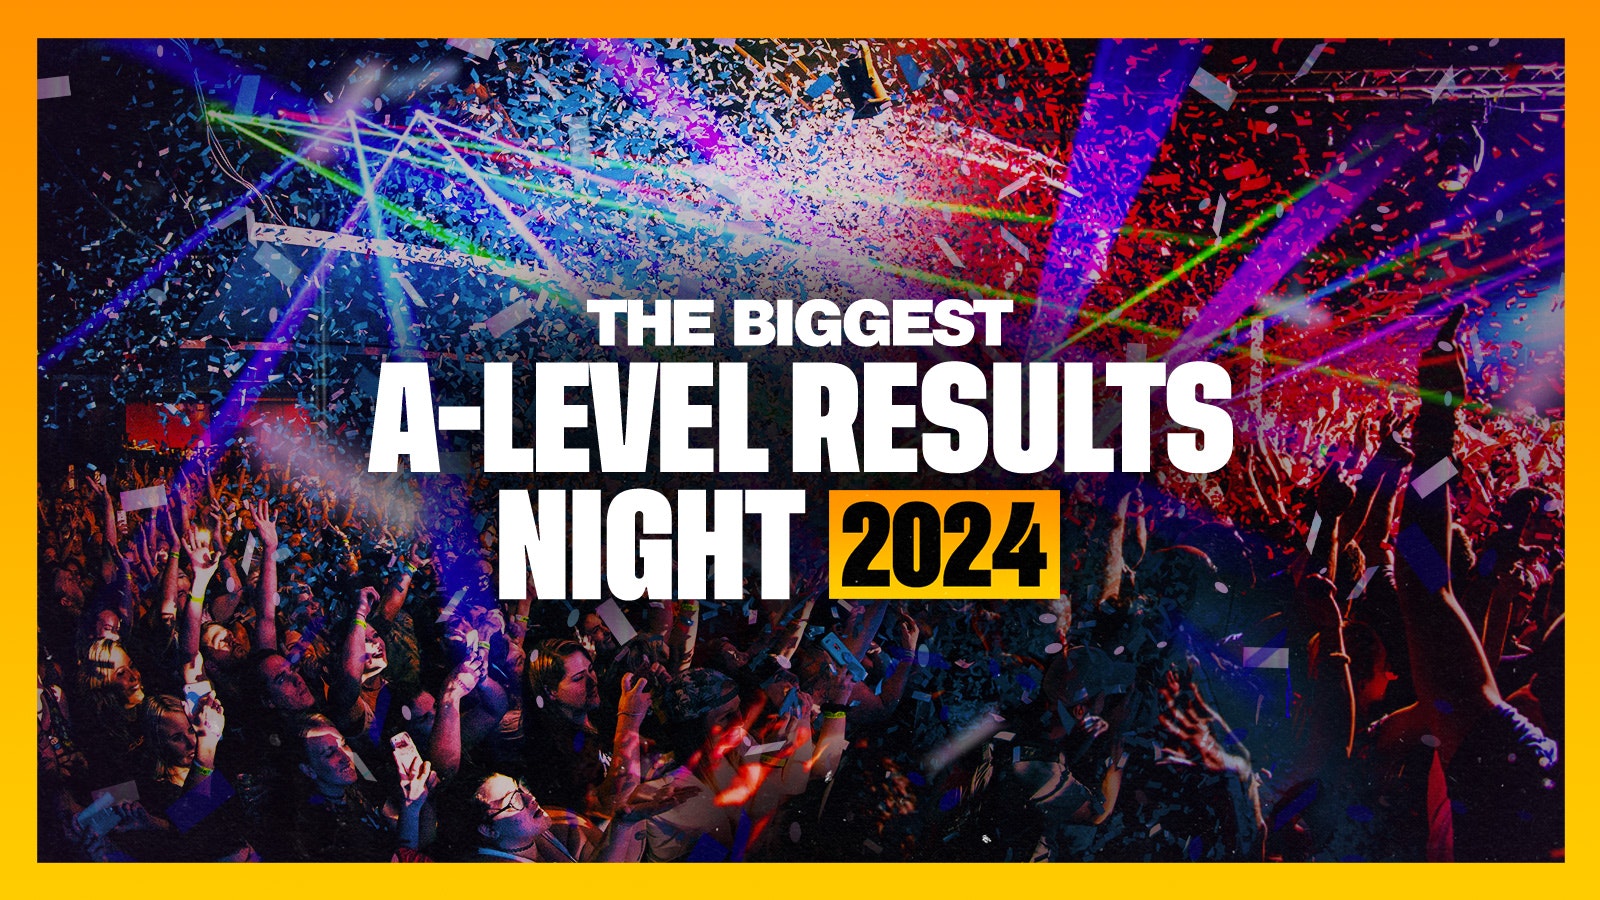 Plymouth A Level Results Night 2024 – SIGN UP FOR FREE NOW!